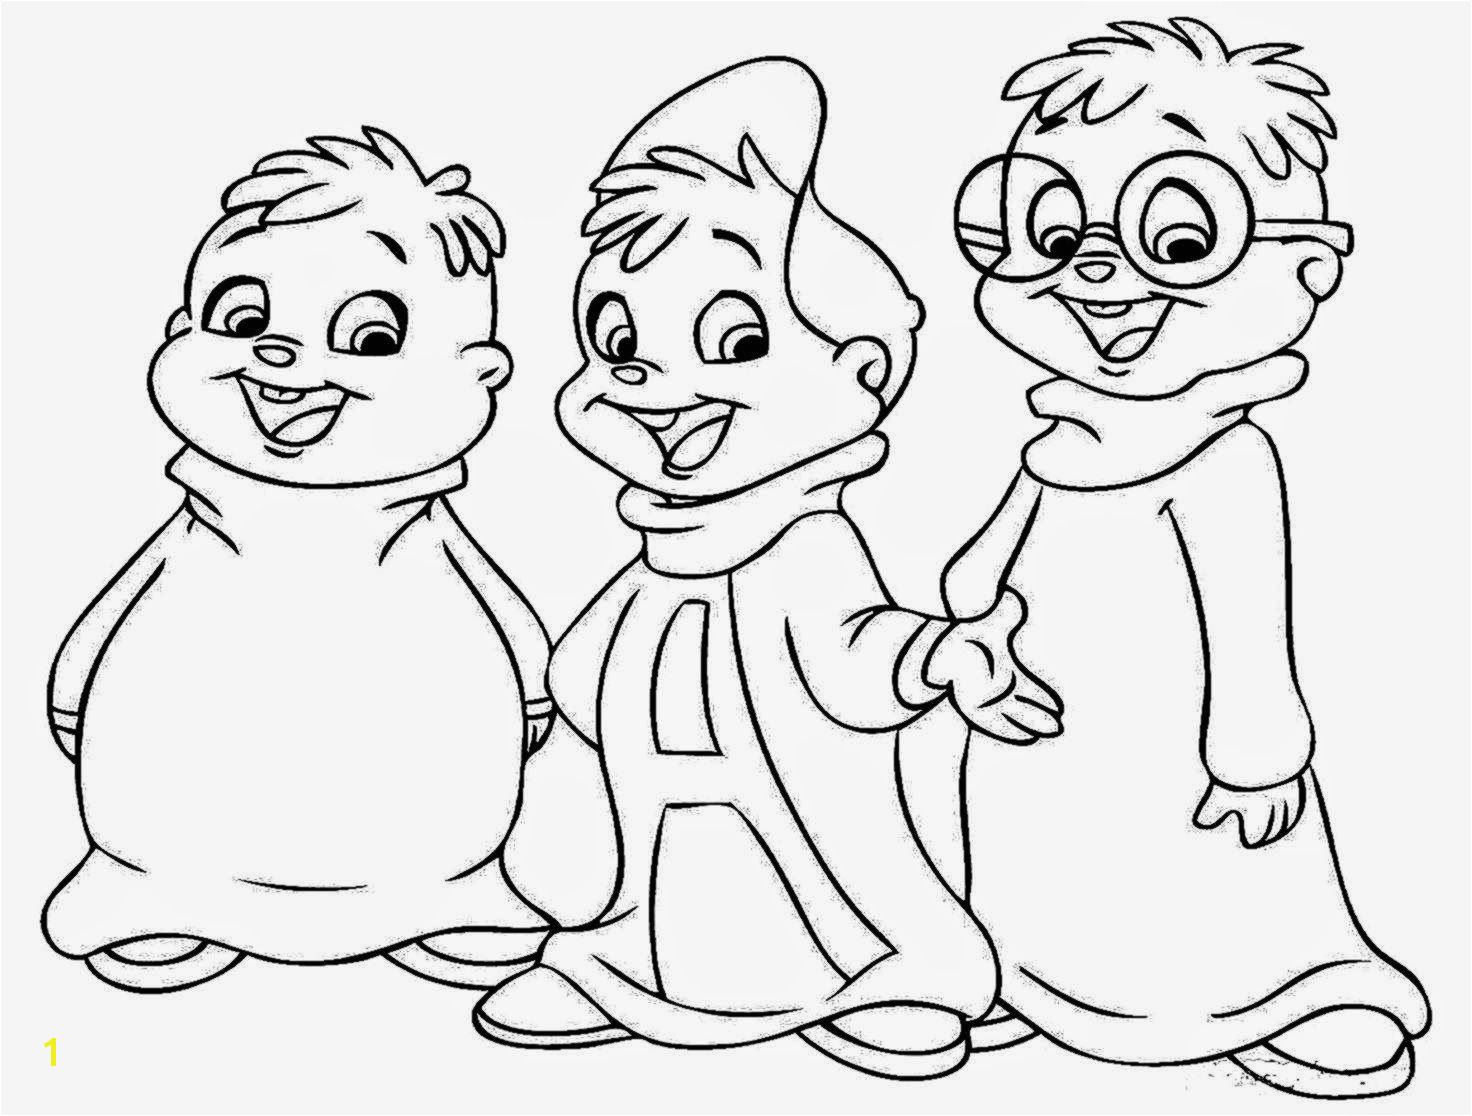 Best of disney jr coloring pages Free 1 f Enjoyable Disney Jr Coloring Pages